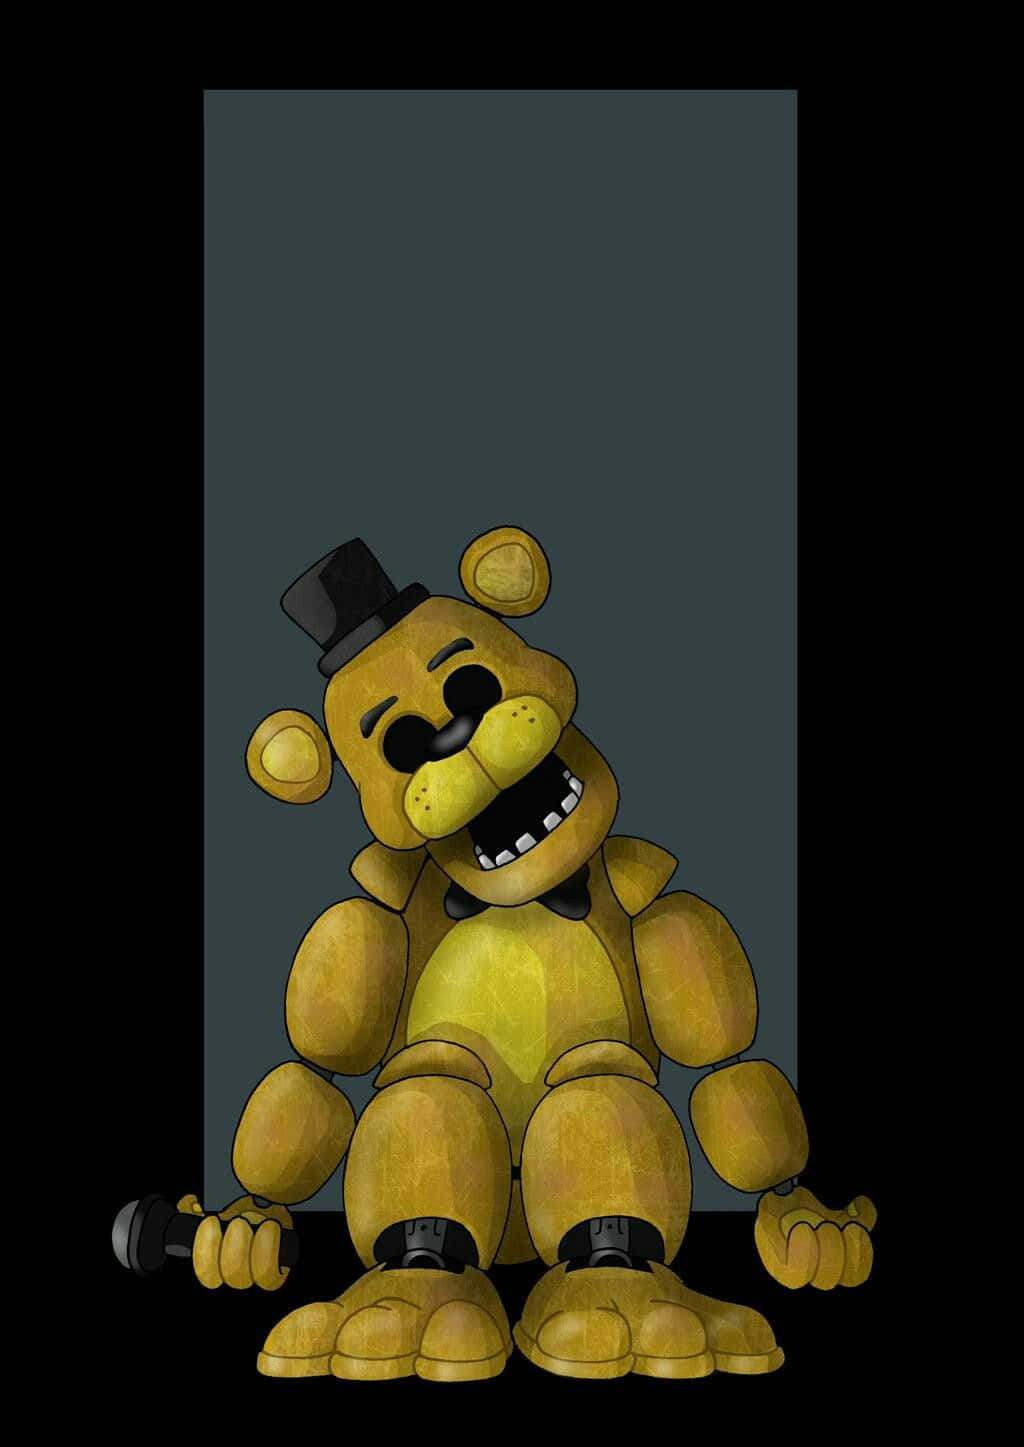 Mysterious Golden Freddy Strikes a Pose Wallpaper